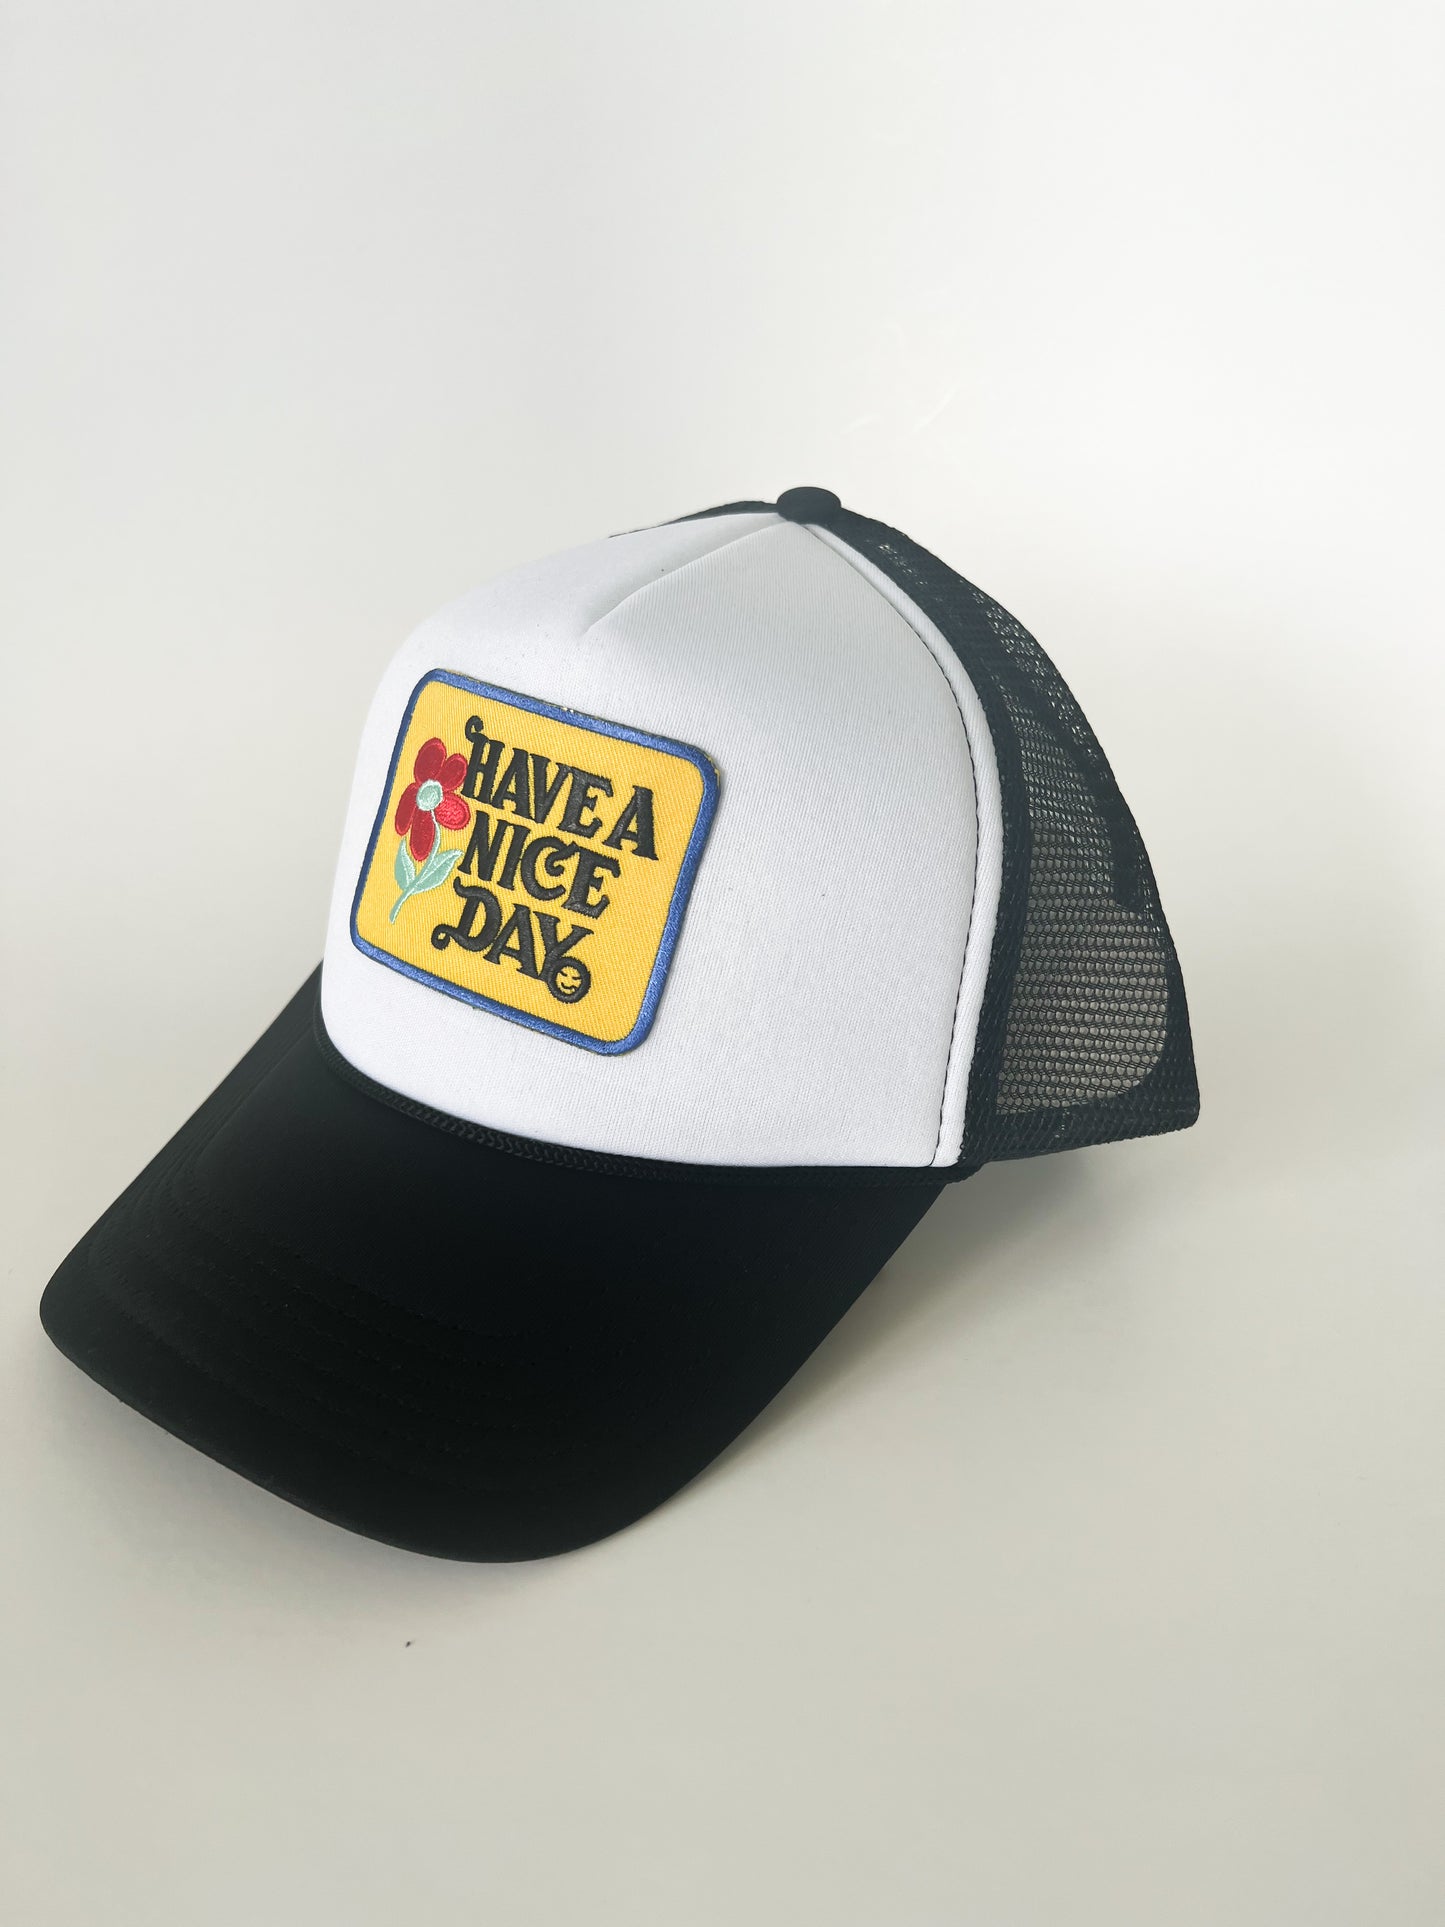 Have a Nice Day Trucker Hat - 2 Colors